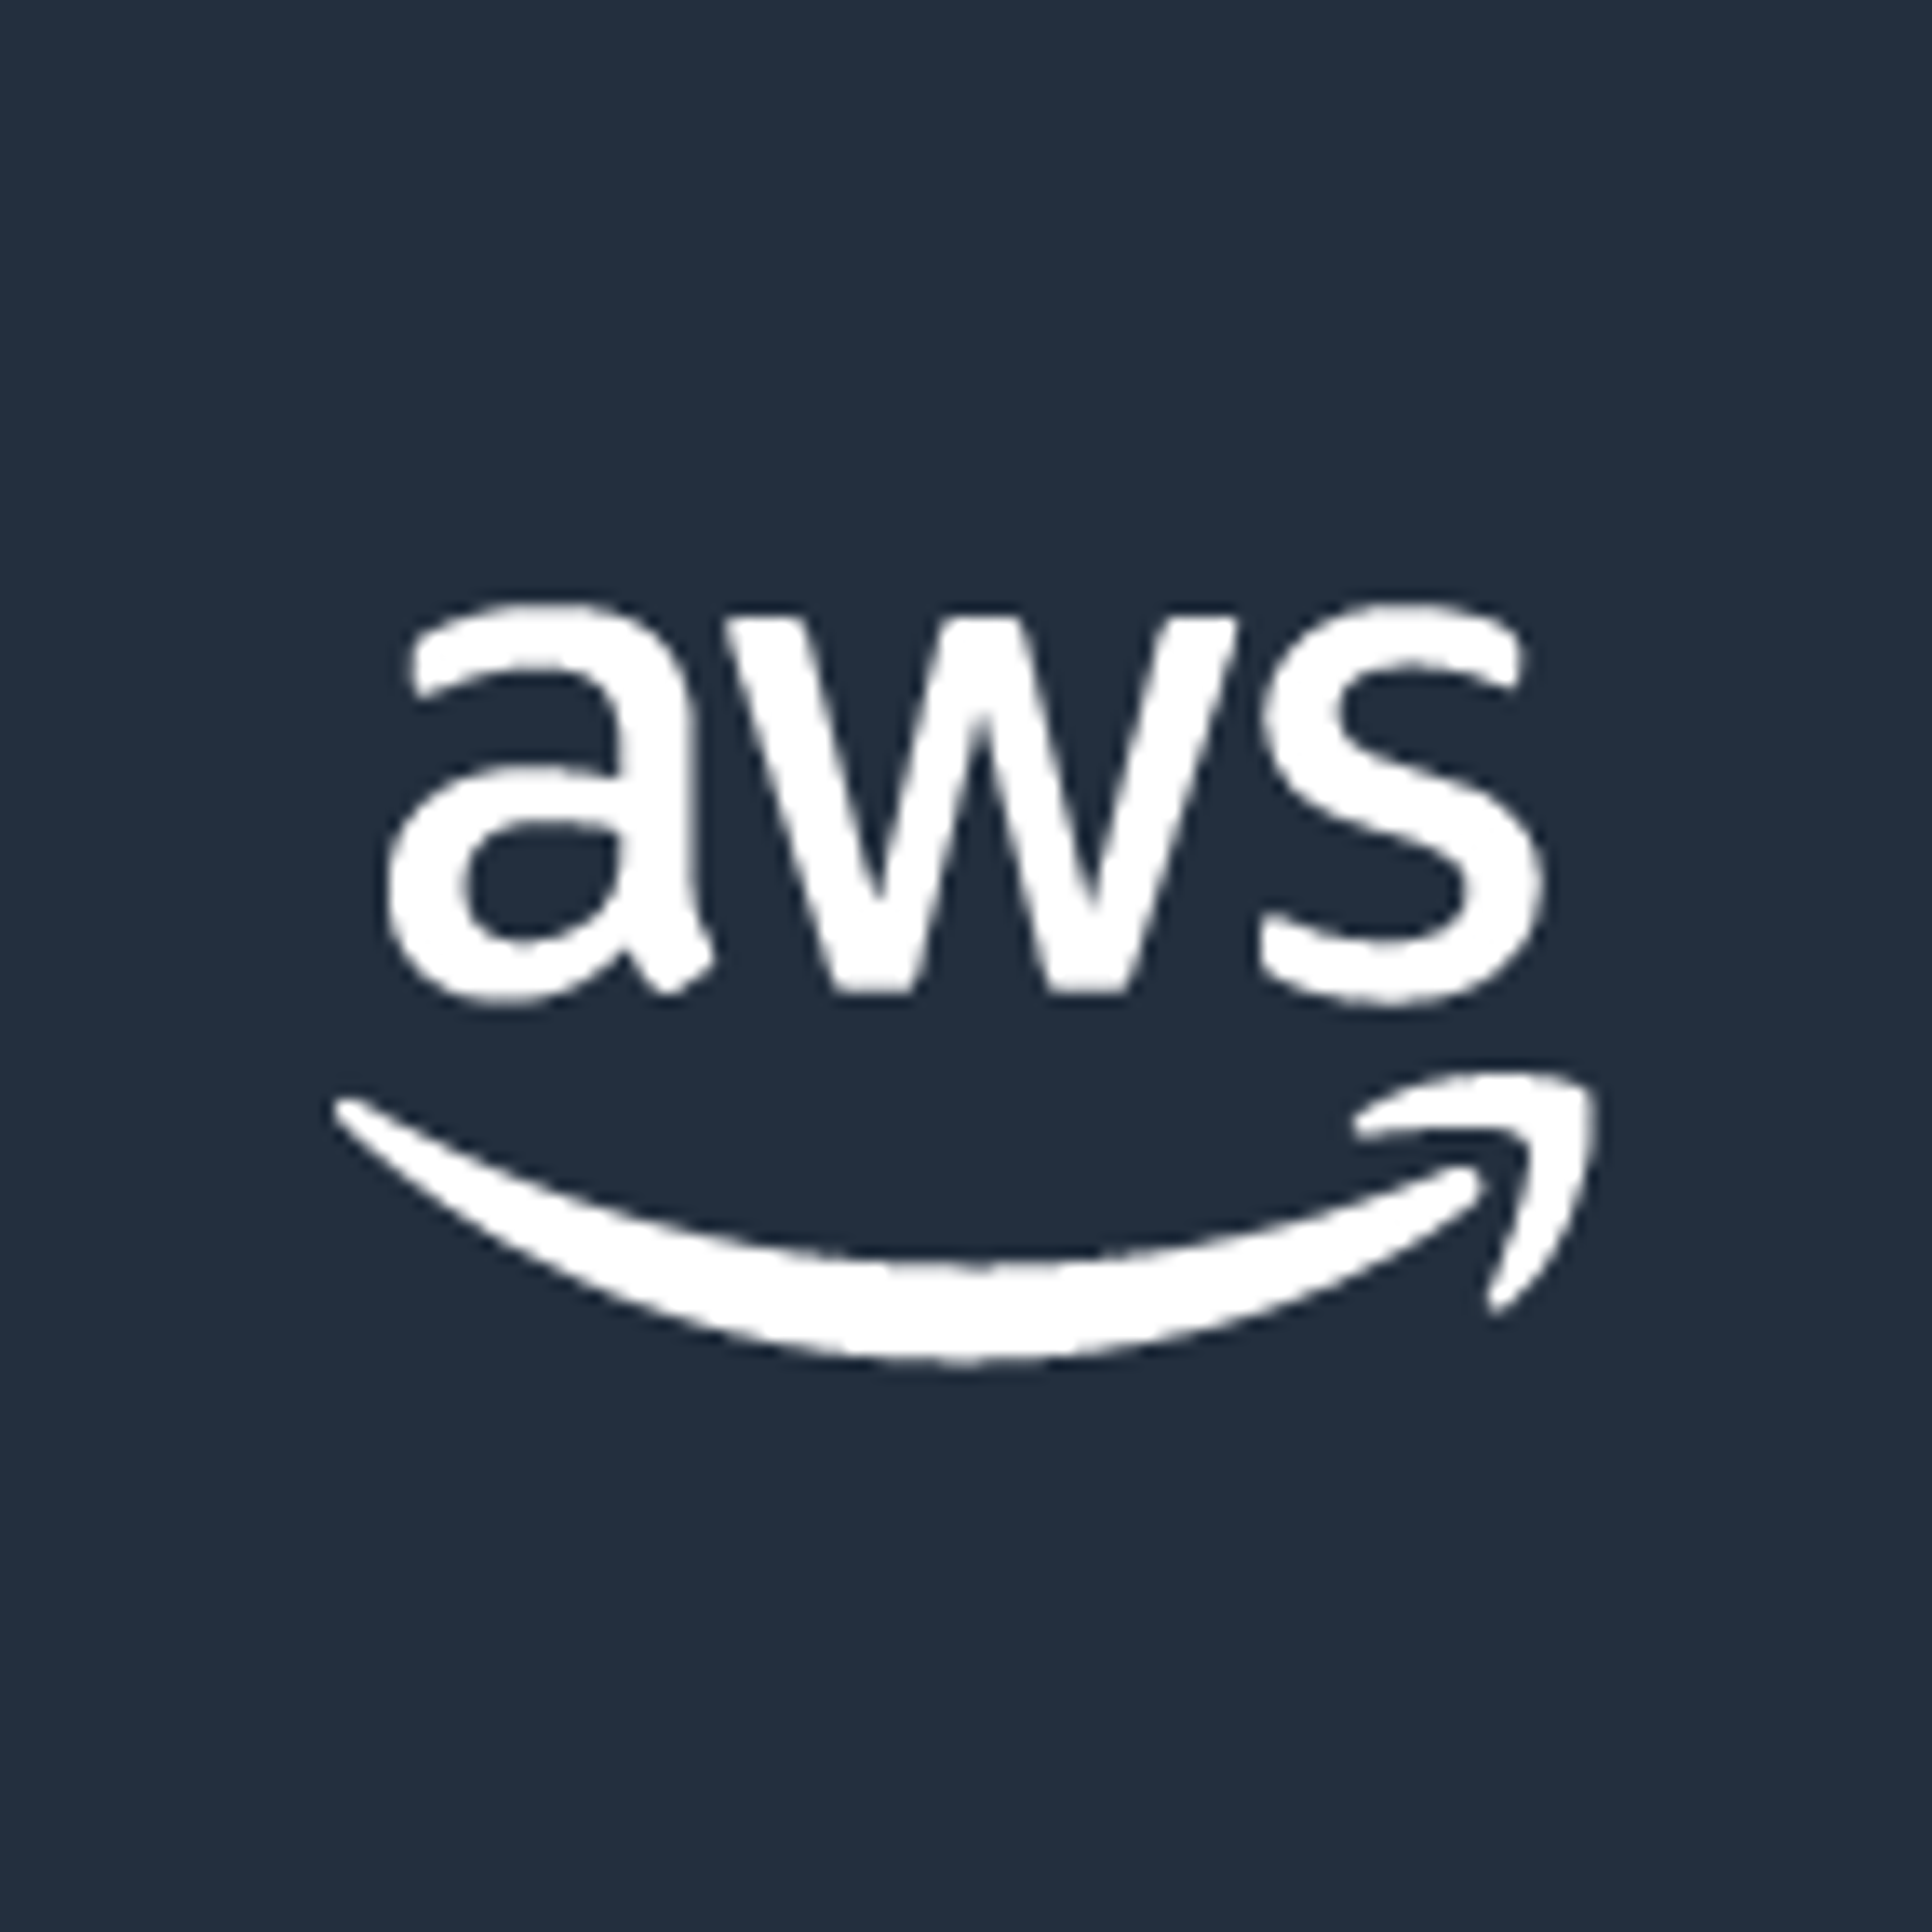 Guidance for Cell-based Architecture on AWS